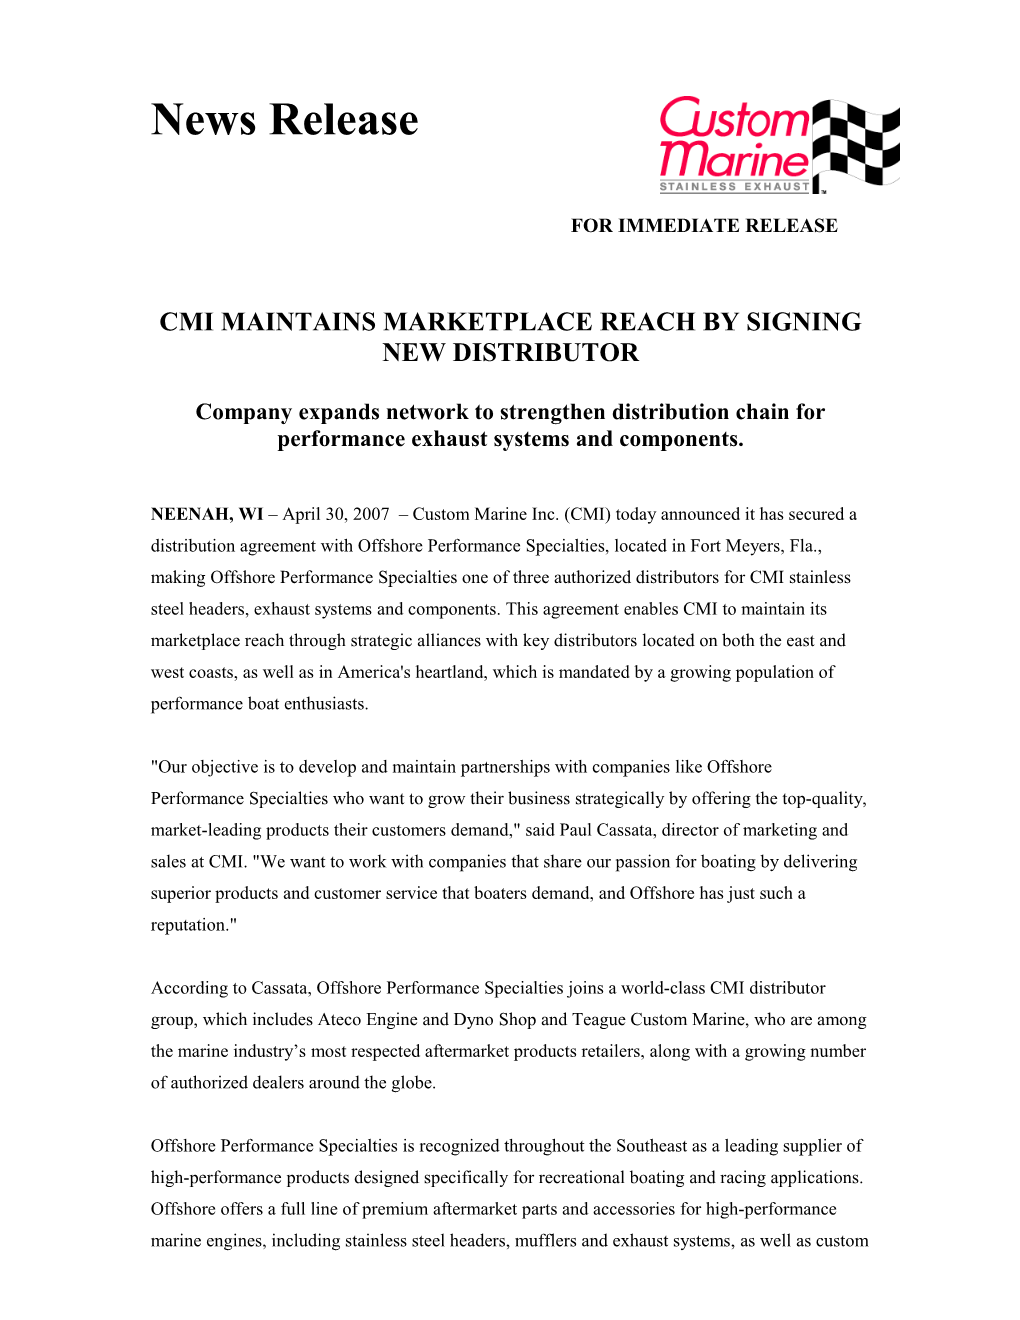 Cmi Maintains Marketplace Reach by Signing New Distributor